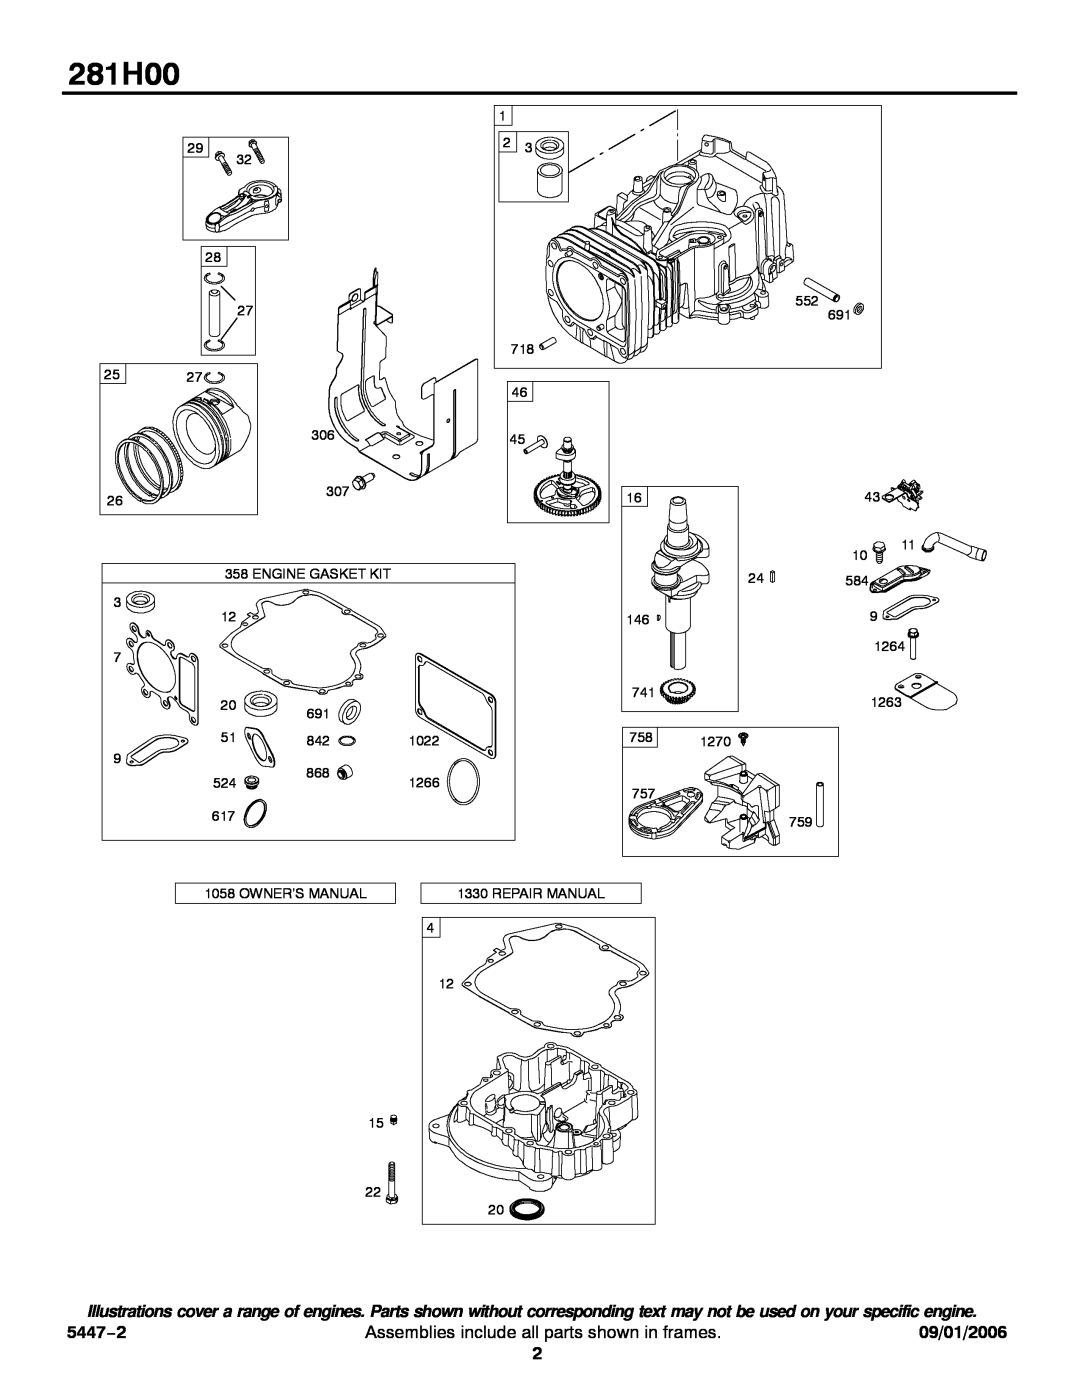 Briggs & Stratton 281H00 service manual 5447−2, Assemblies include all parts shown in frames, 09/01/2006 